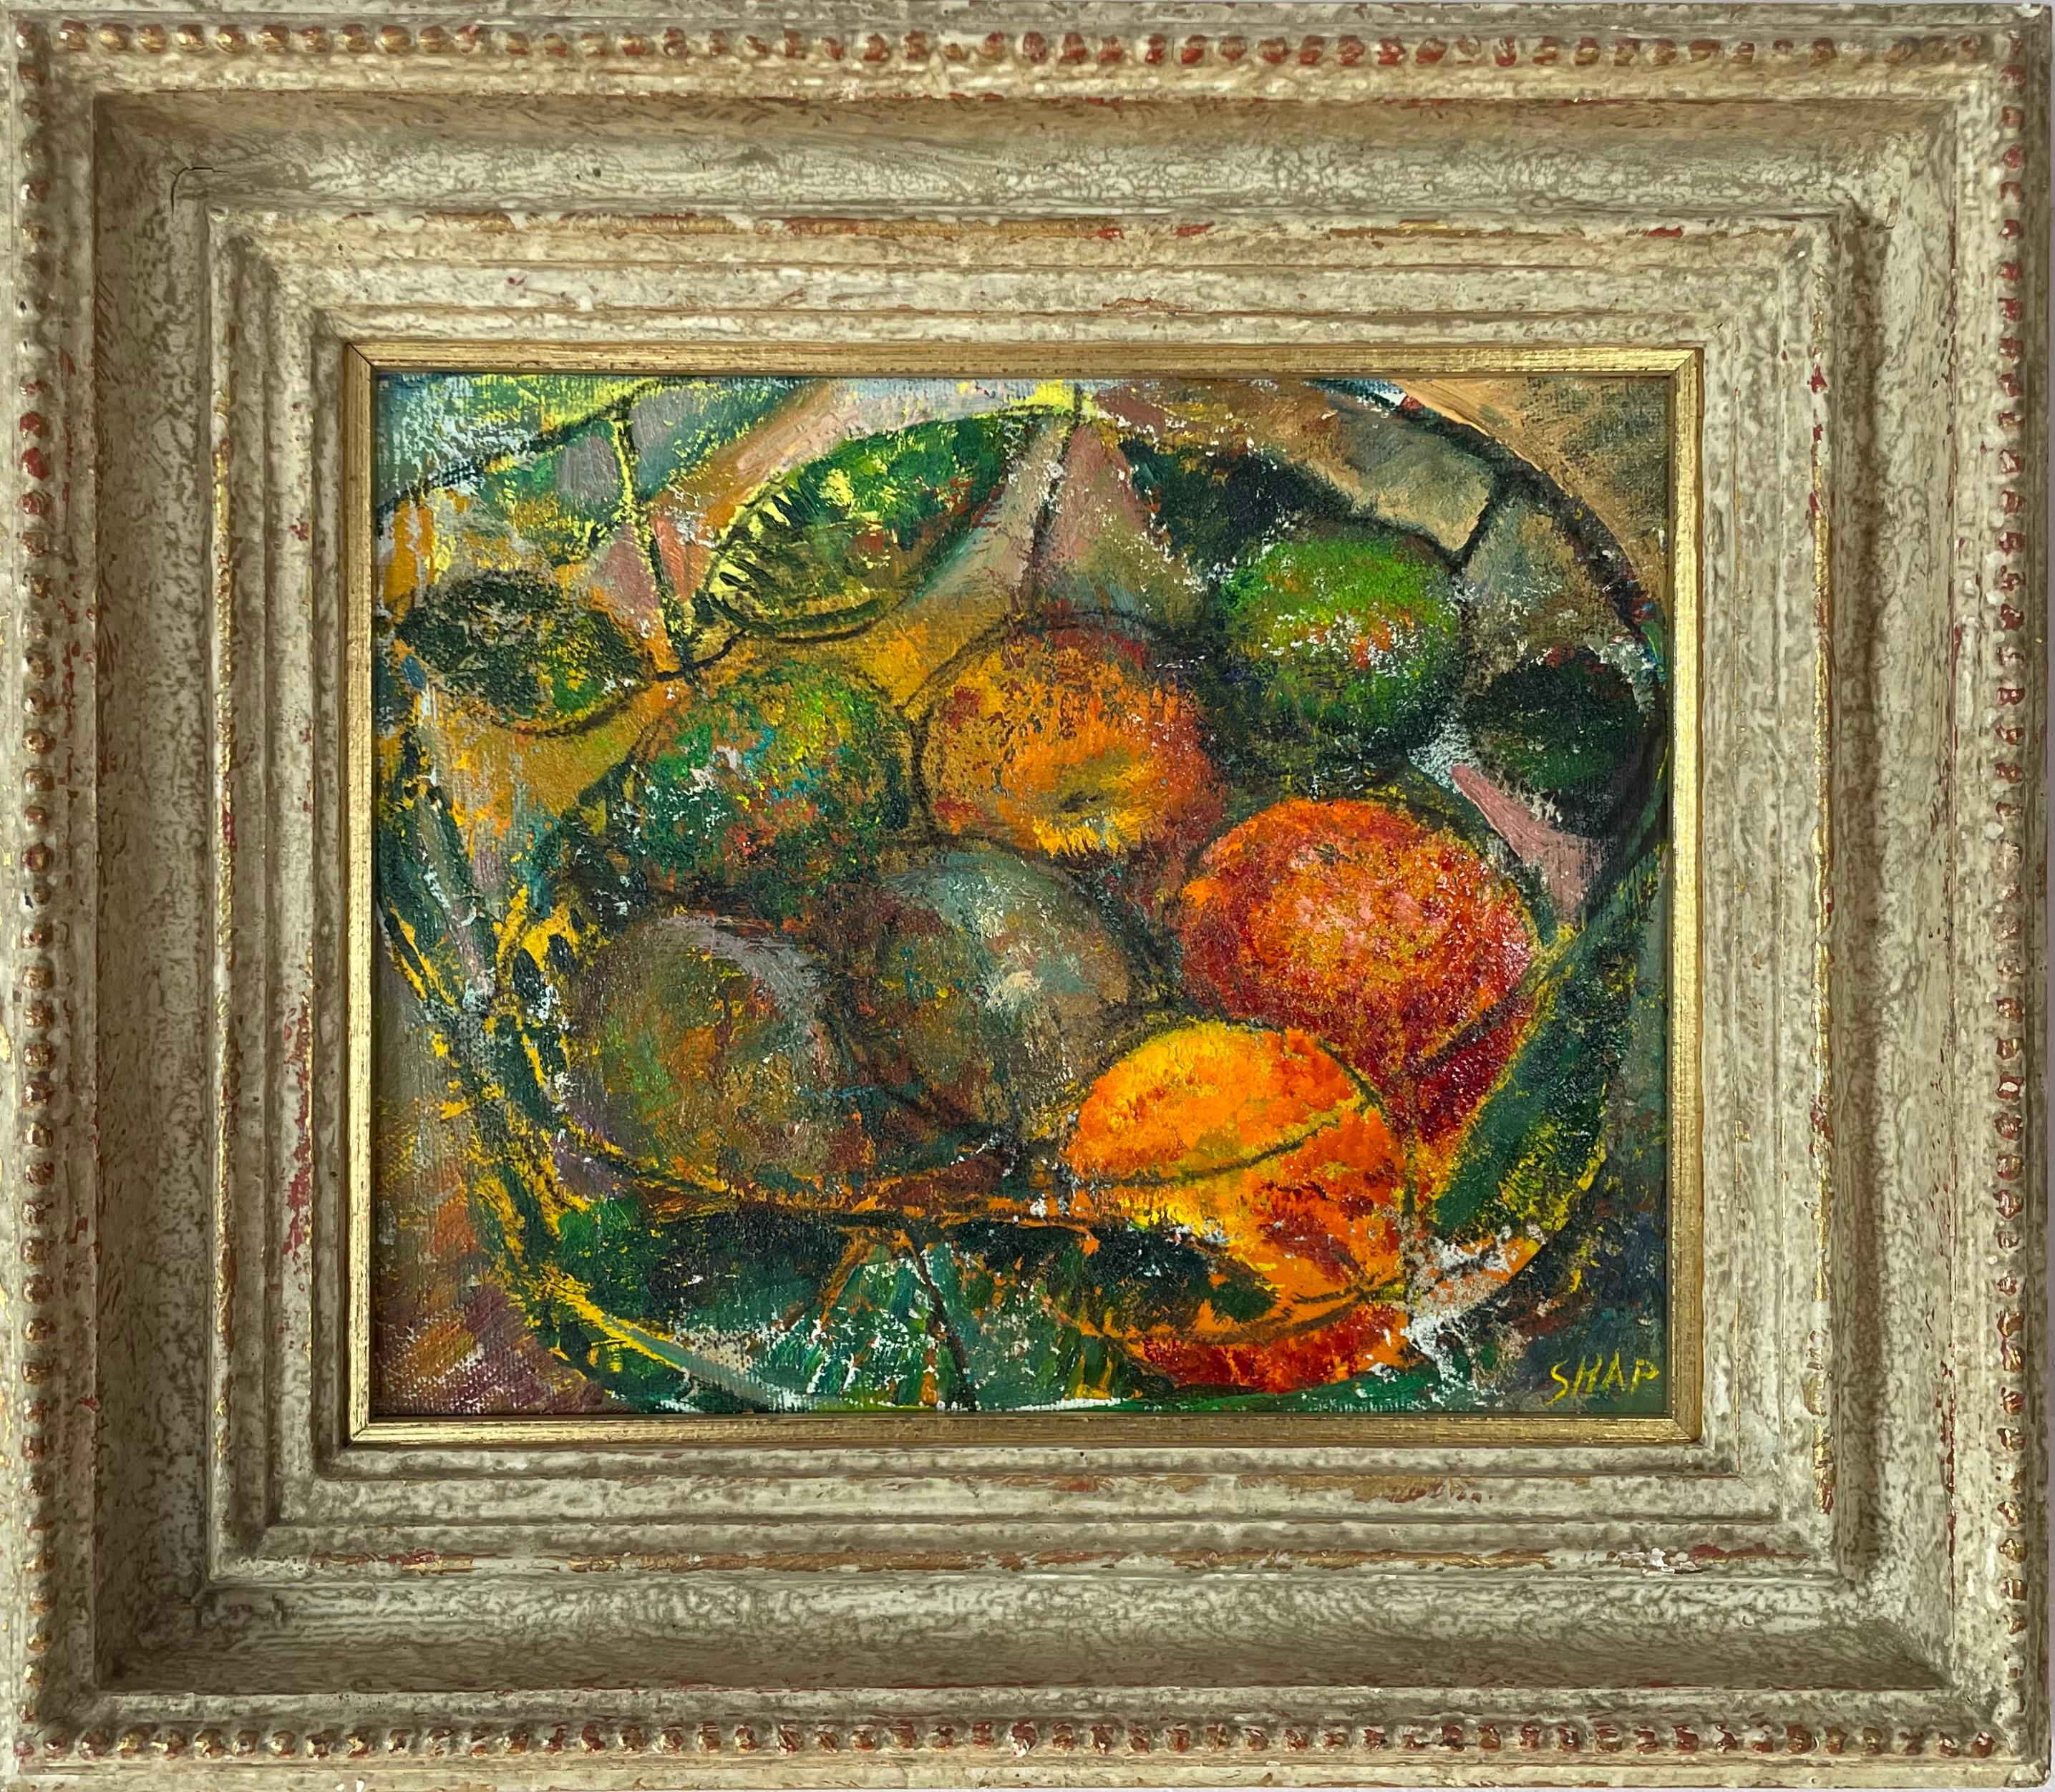 Ronald Shap Still-Life Painting - Apples and Avocados 